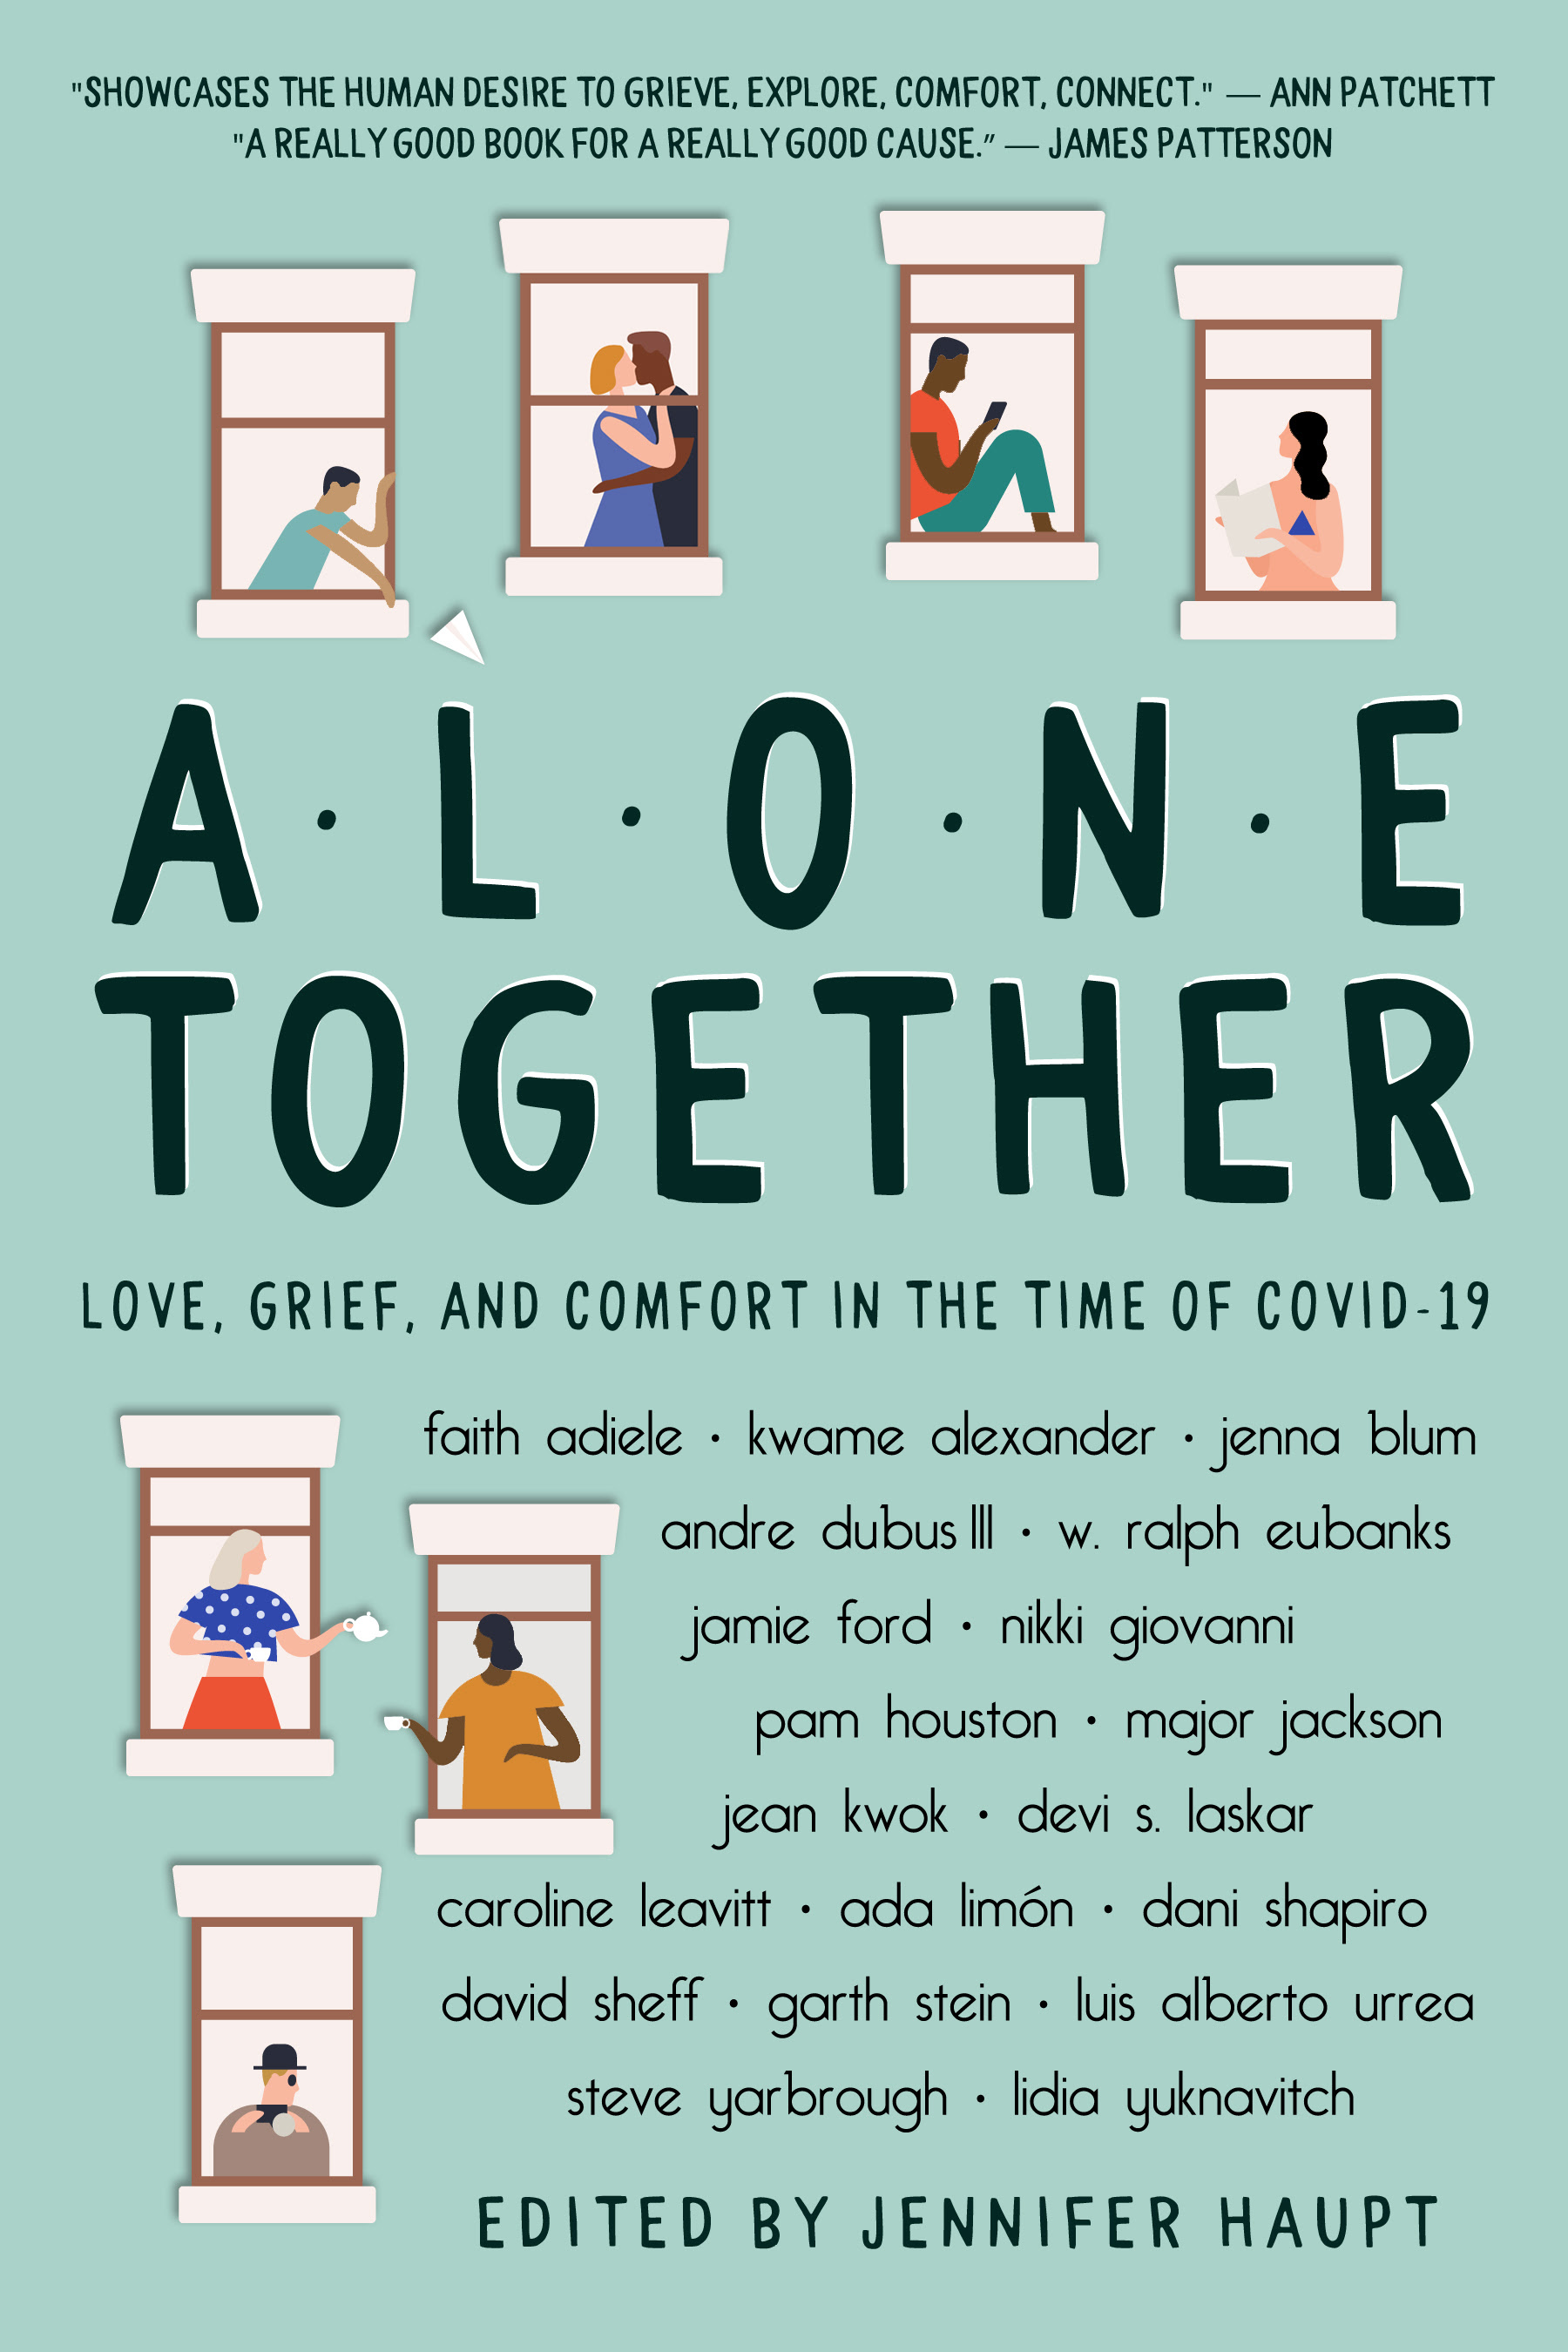 Book cover for "Alone Together: Love, Grief, and Comfort in the Tme of COVID-19"